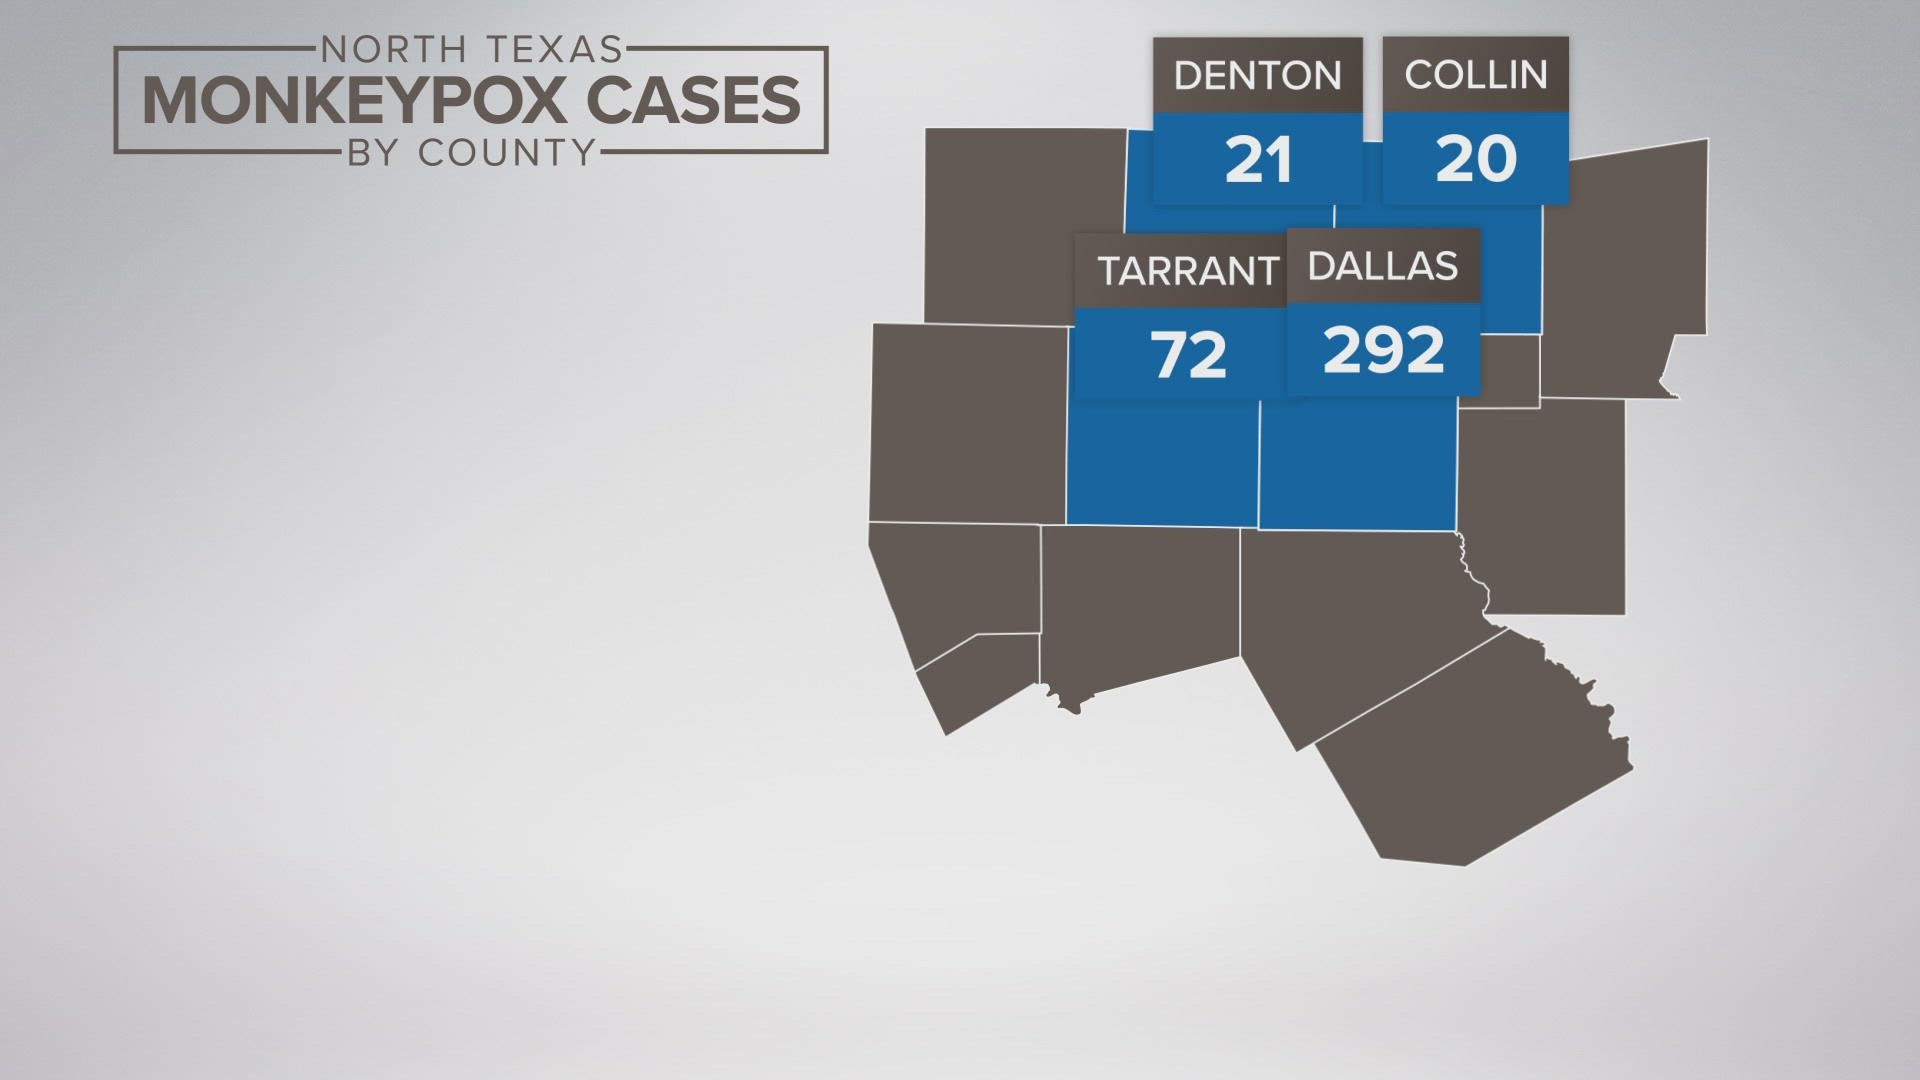 Dallas County has the most monkeypox cases at 292.